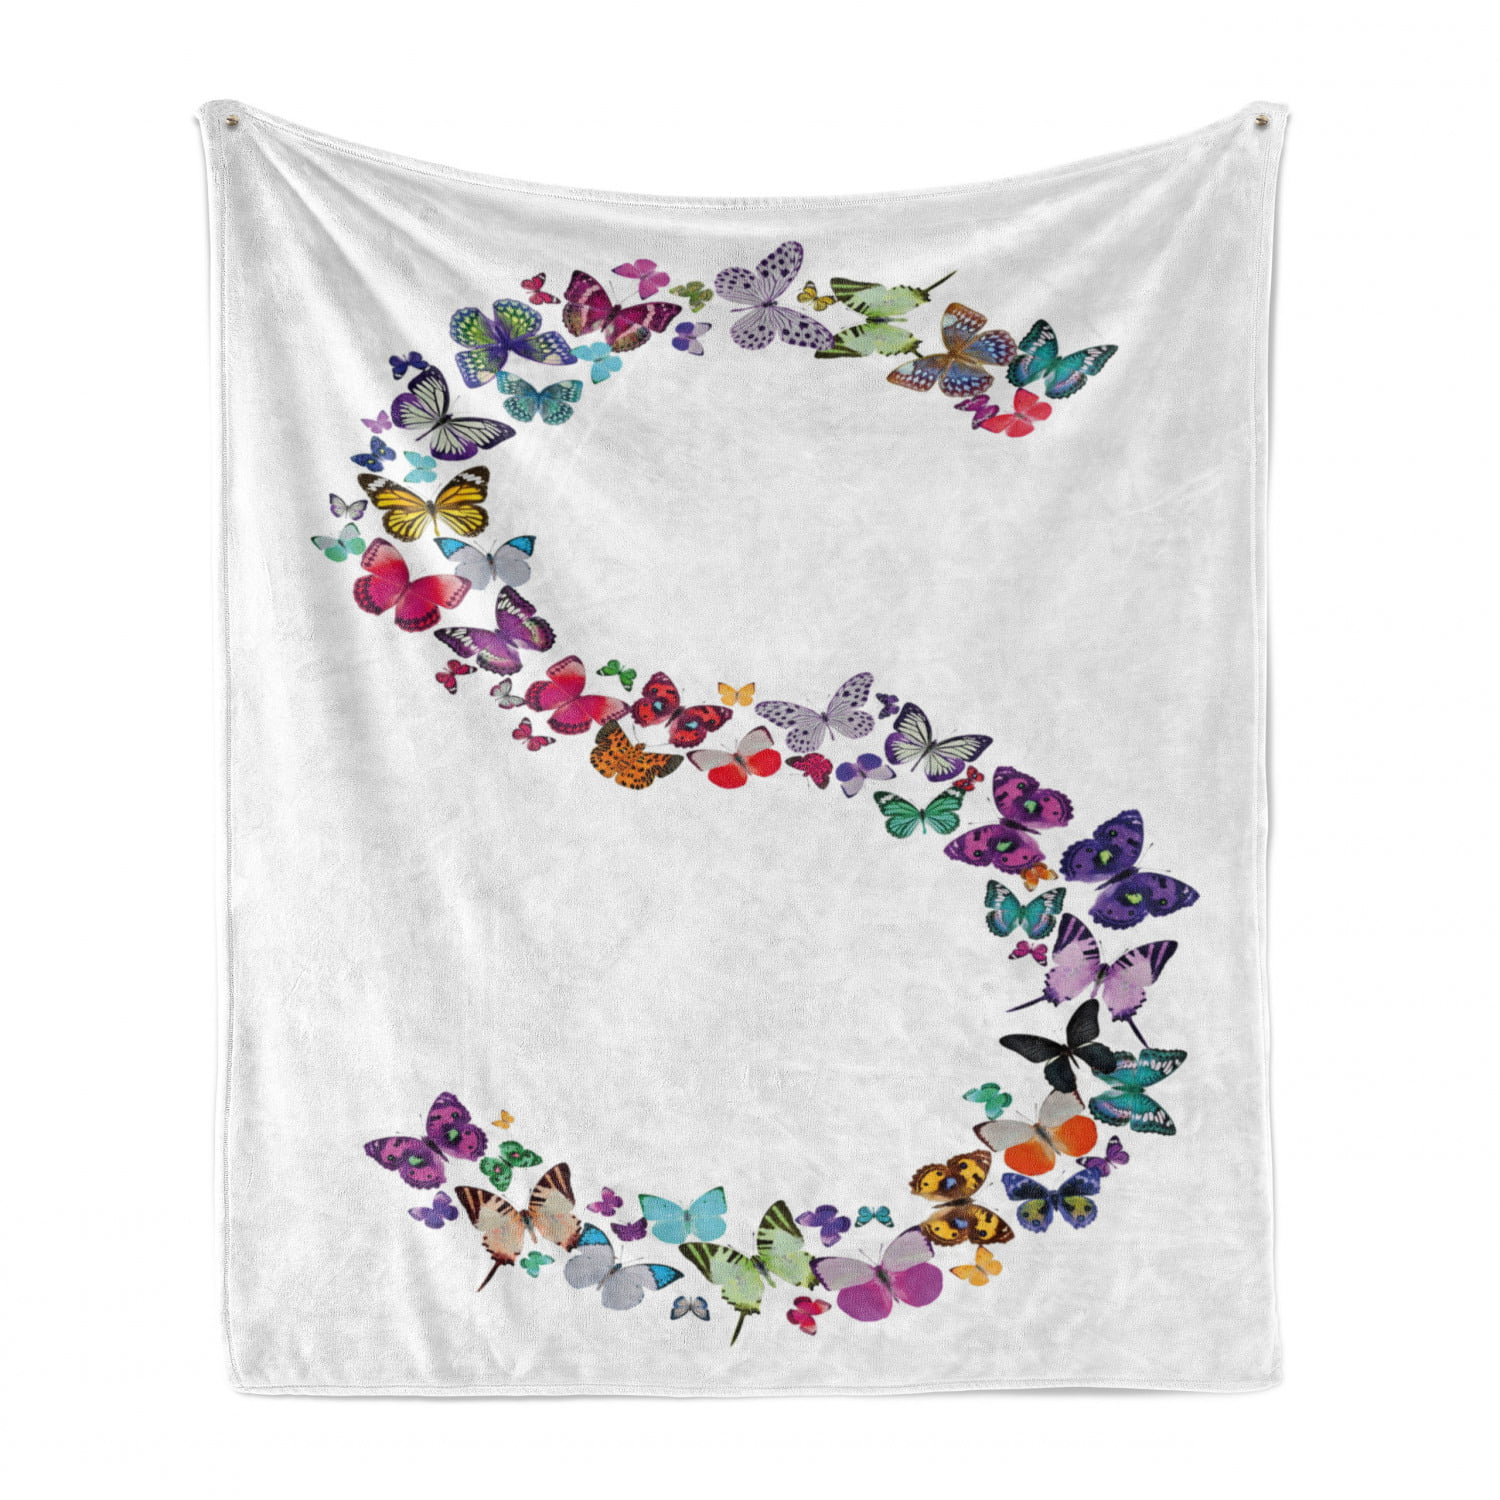 Multicolor Cozy Plush for Indoor and Outdoor Use Ambesonne Letter O Soft Flannel Fleece Throw Blanket ABC of Summer Nature Typography with Various Flying Butterflies Vibrant Creatures 50 x 70 